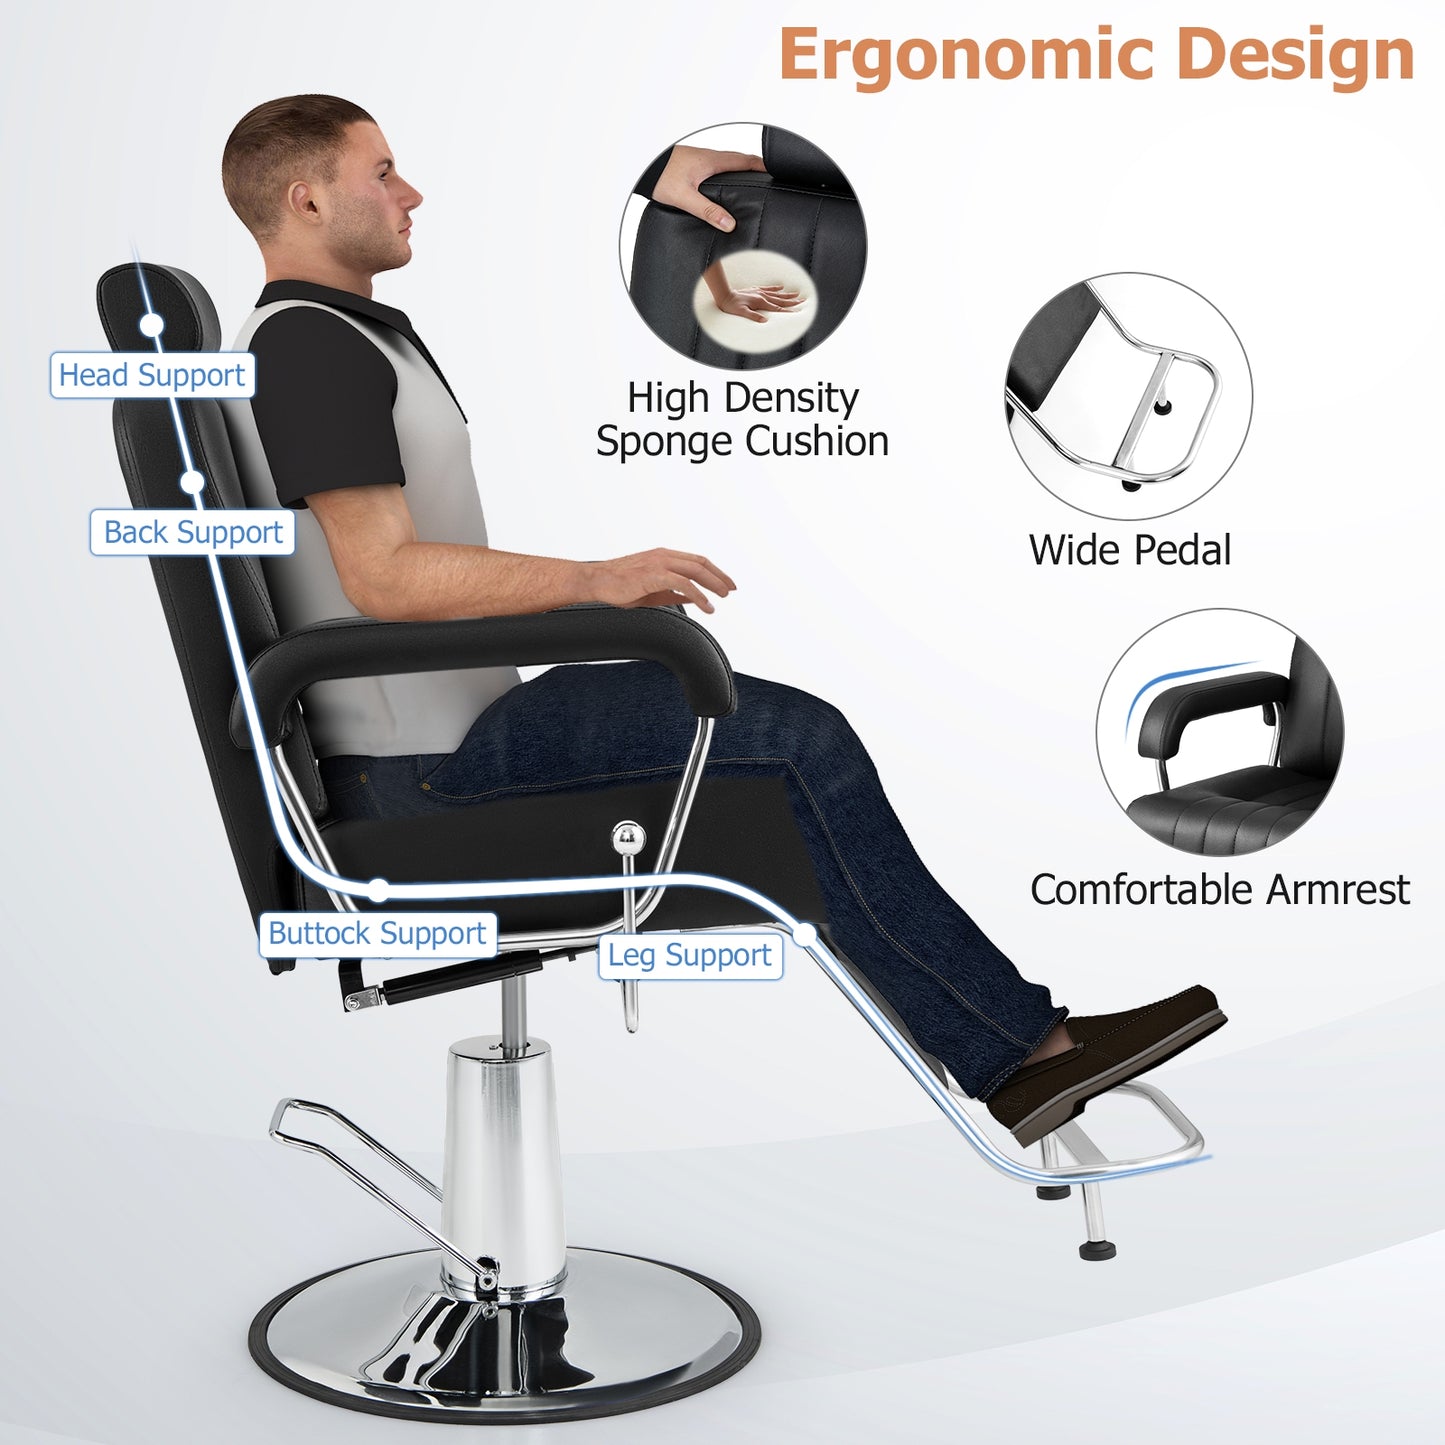 360 Degrees Swivel Salon Hydraulic Barber Chair with Adjustable Headrest and Reclining Backrest-Black